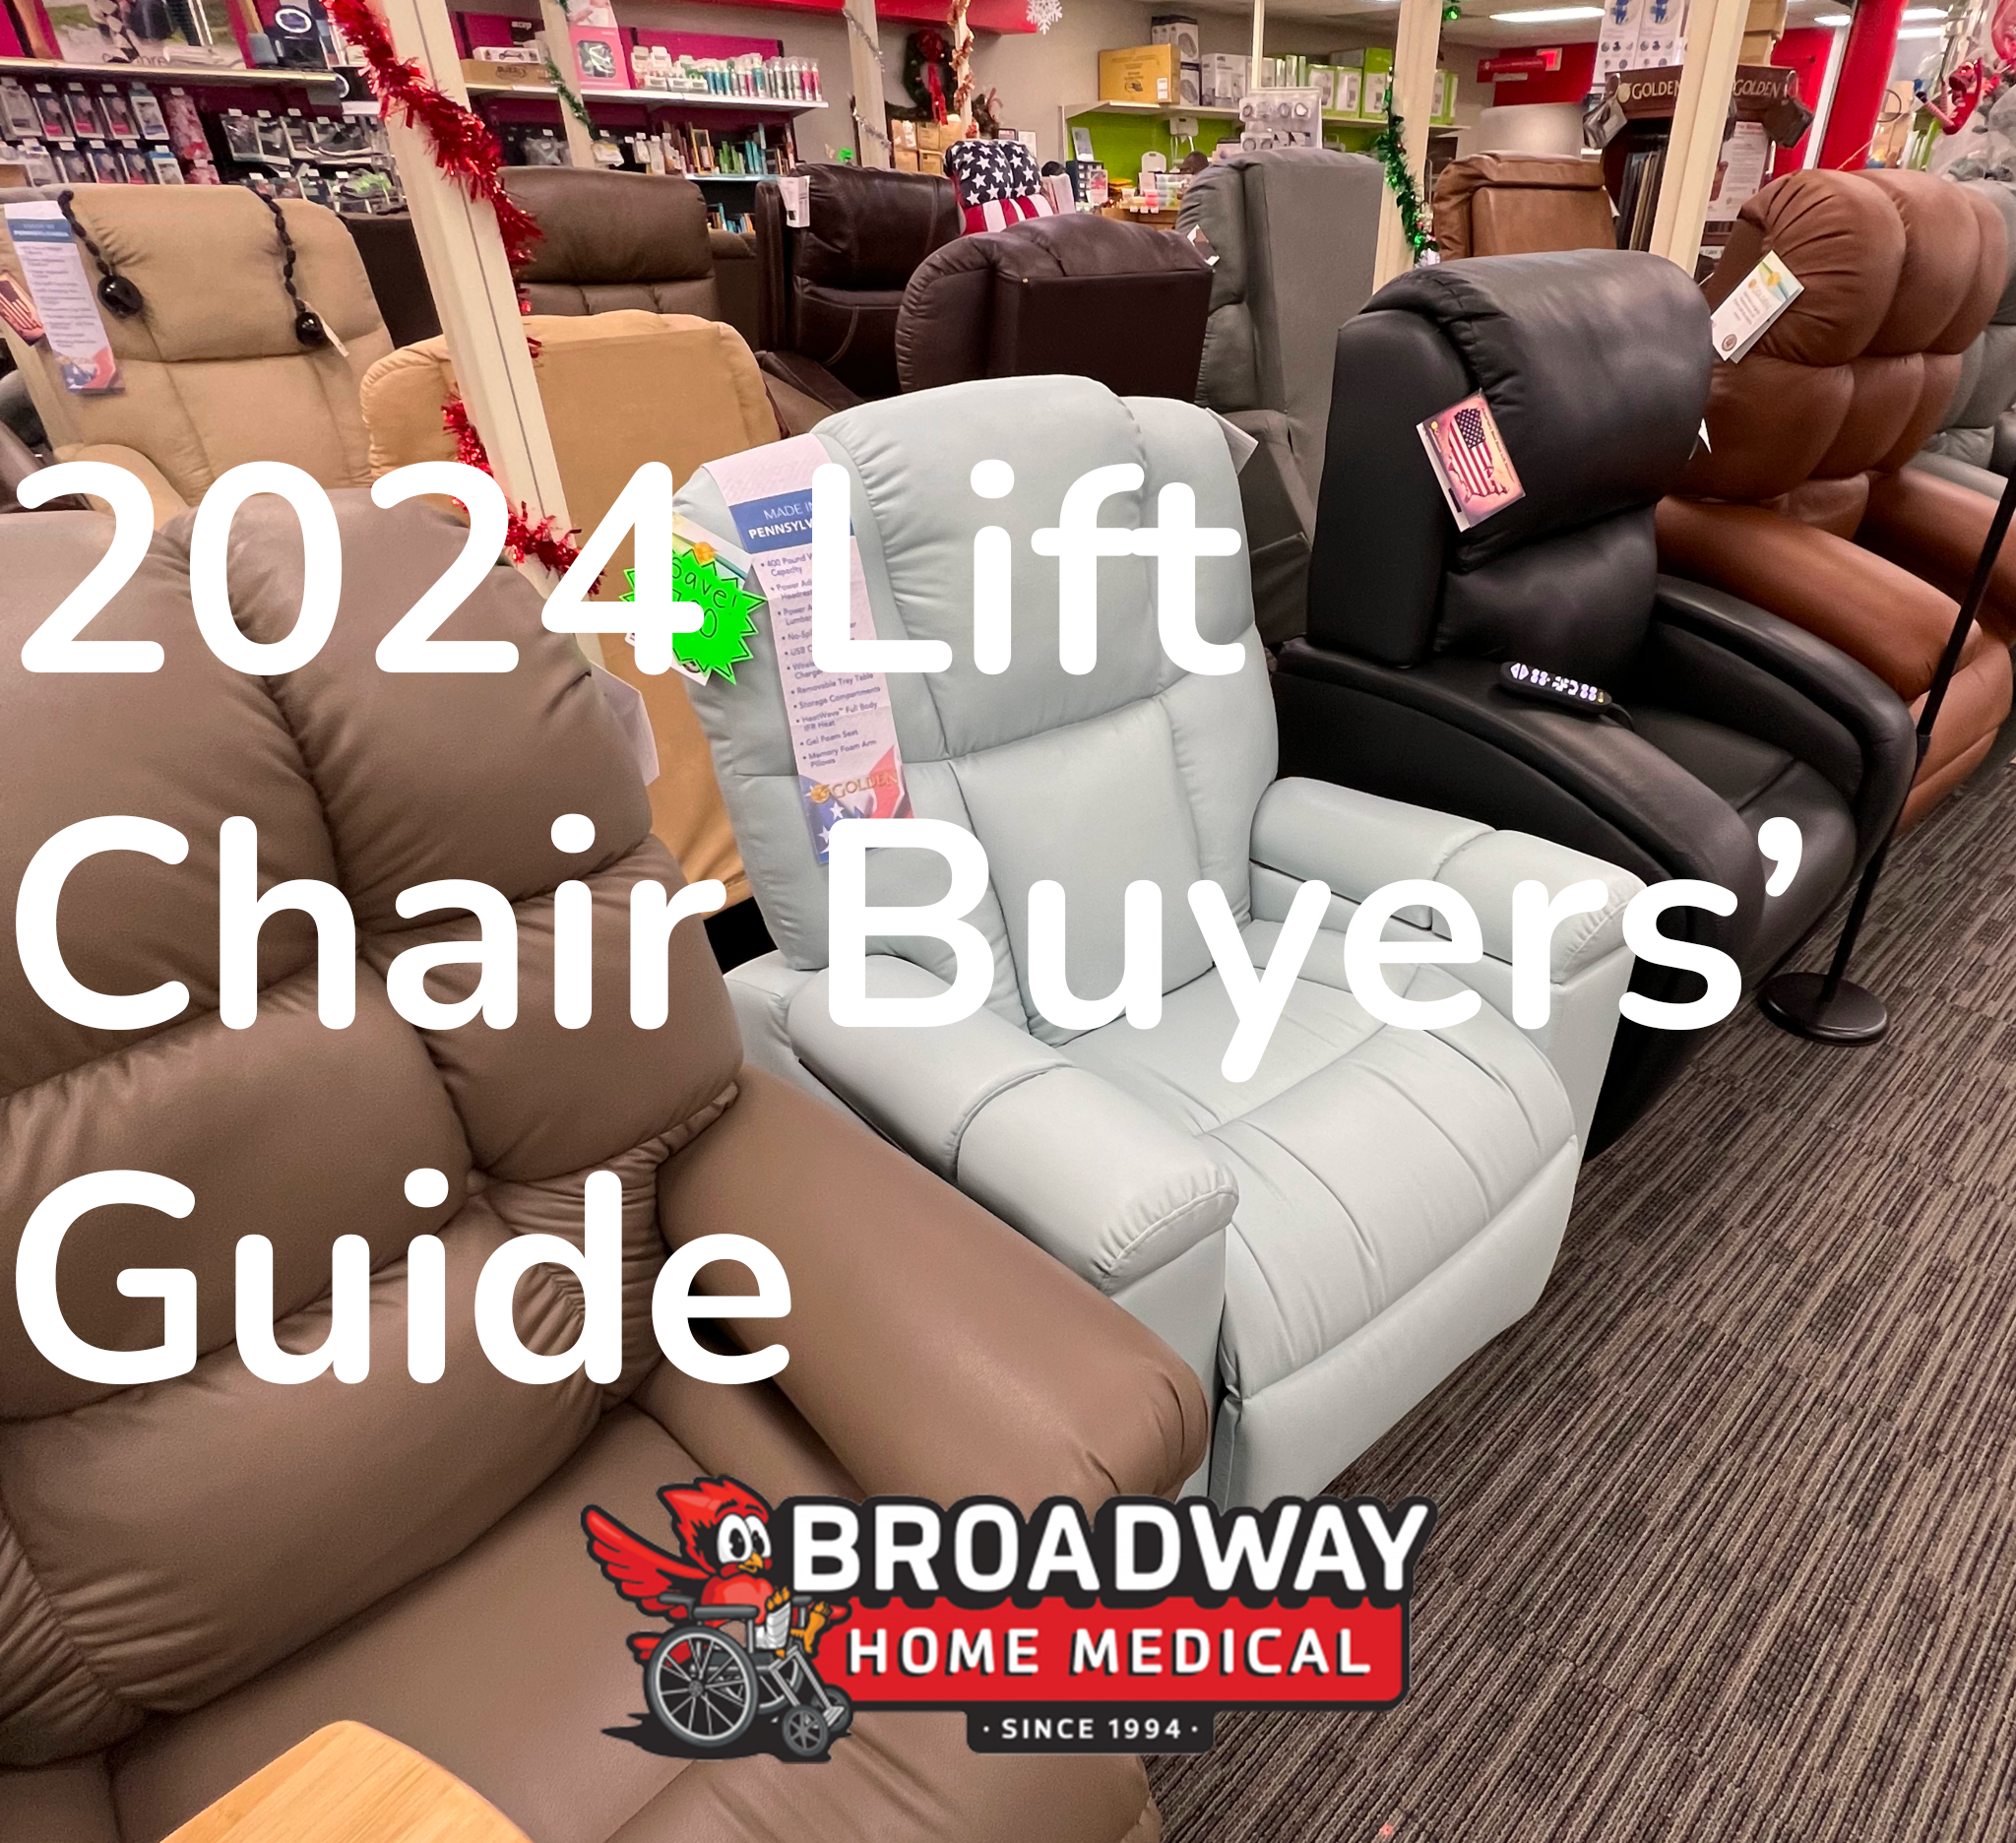 Ultra Lift Chair - Broadway Home Medical